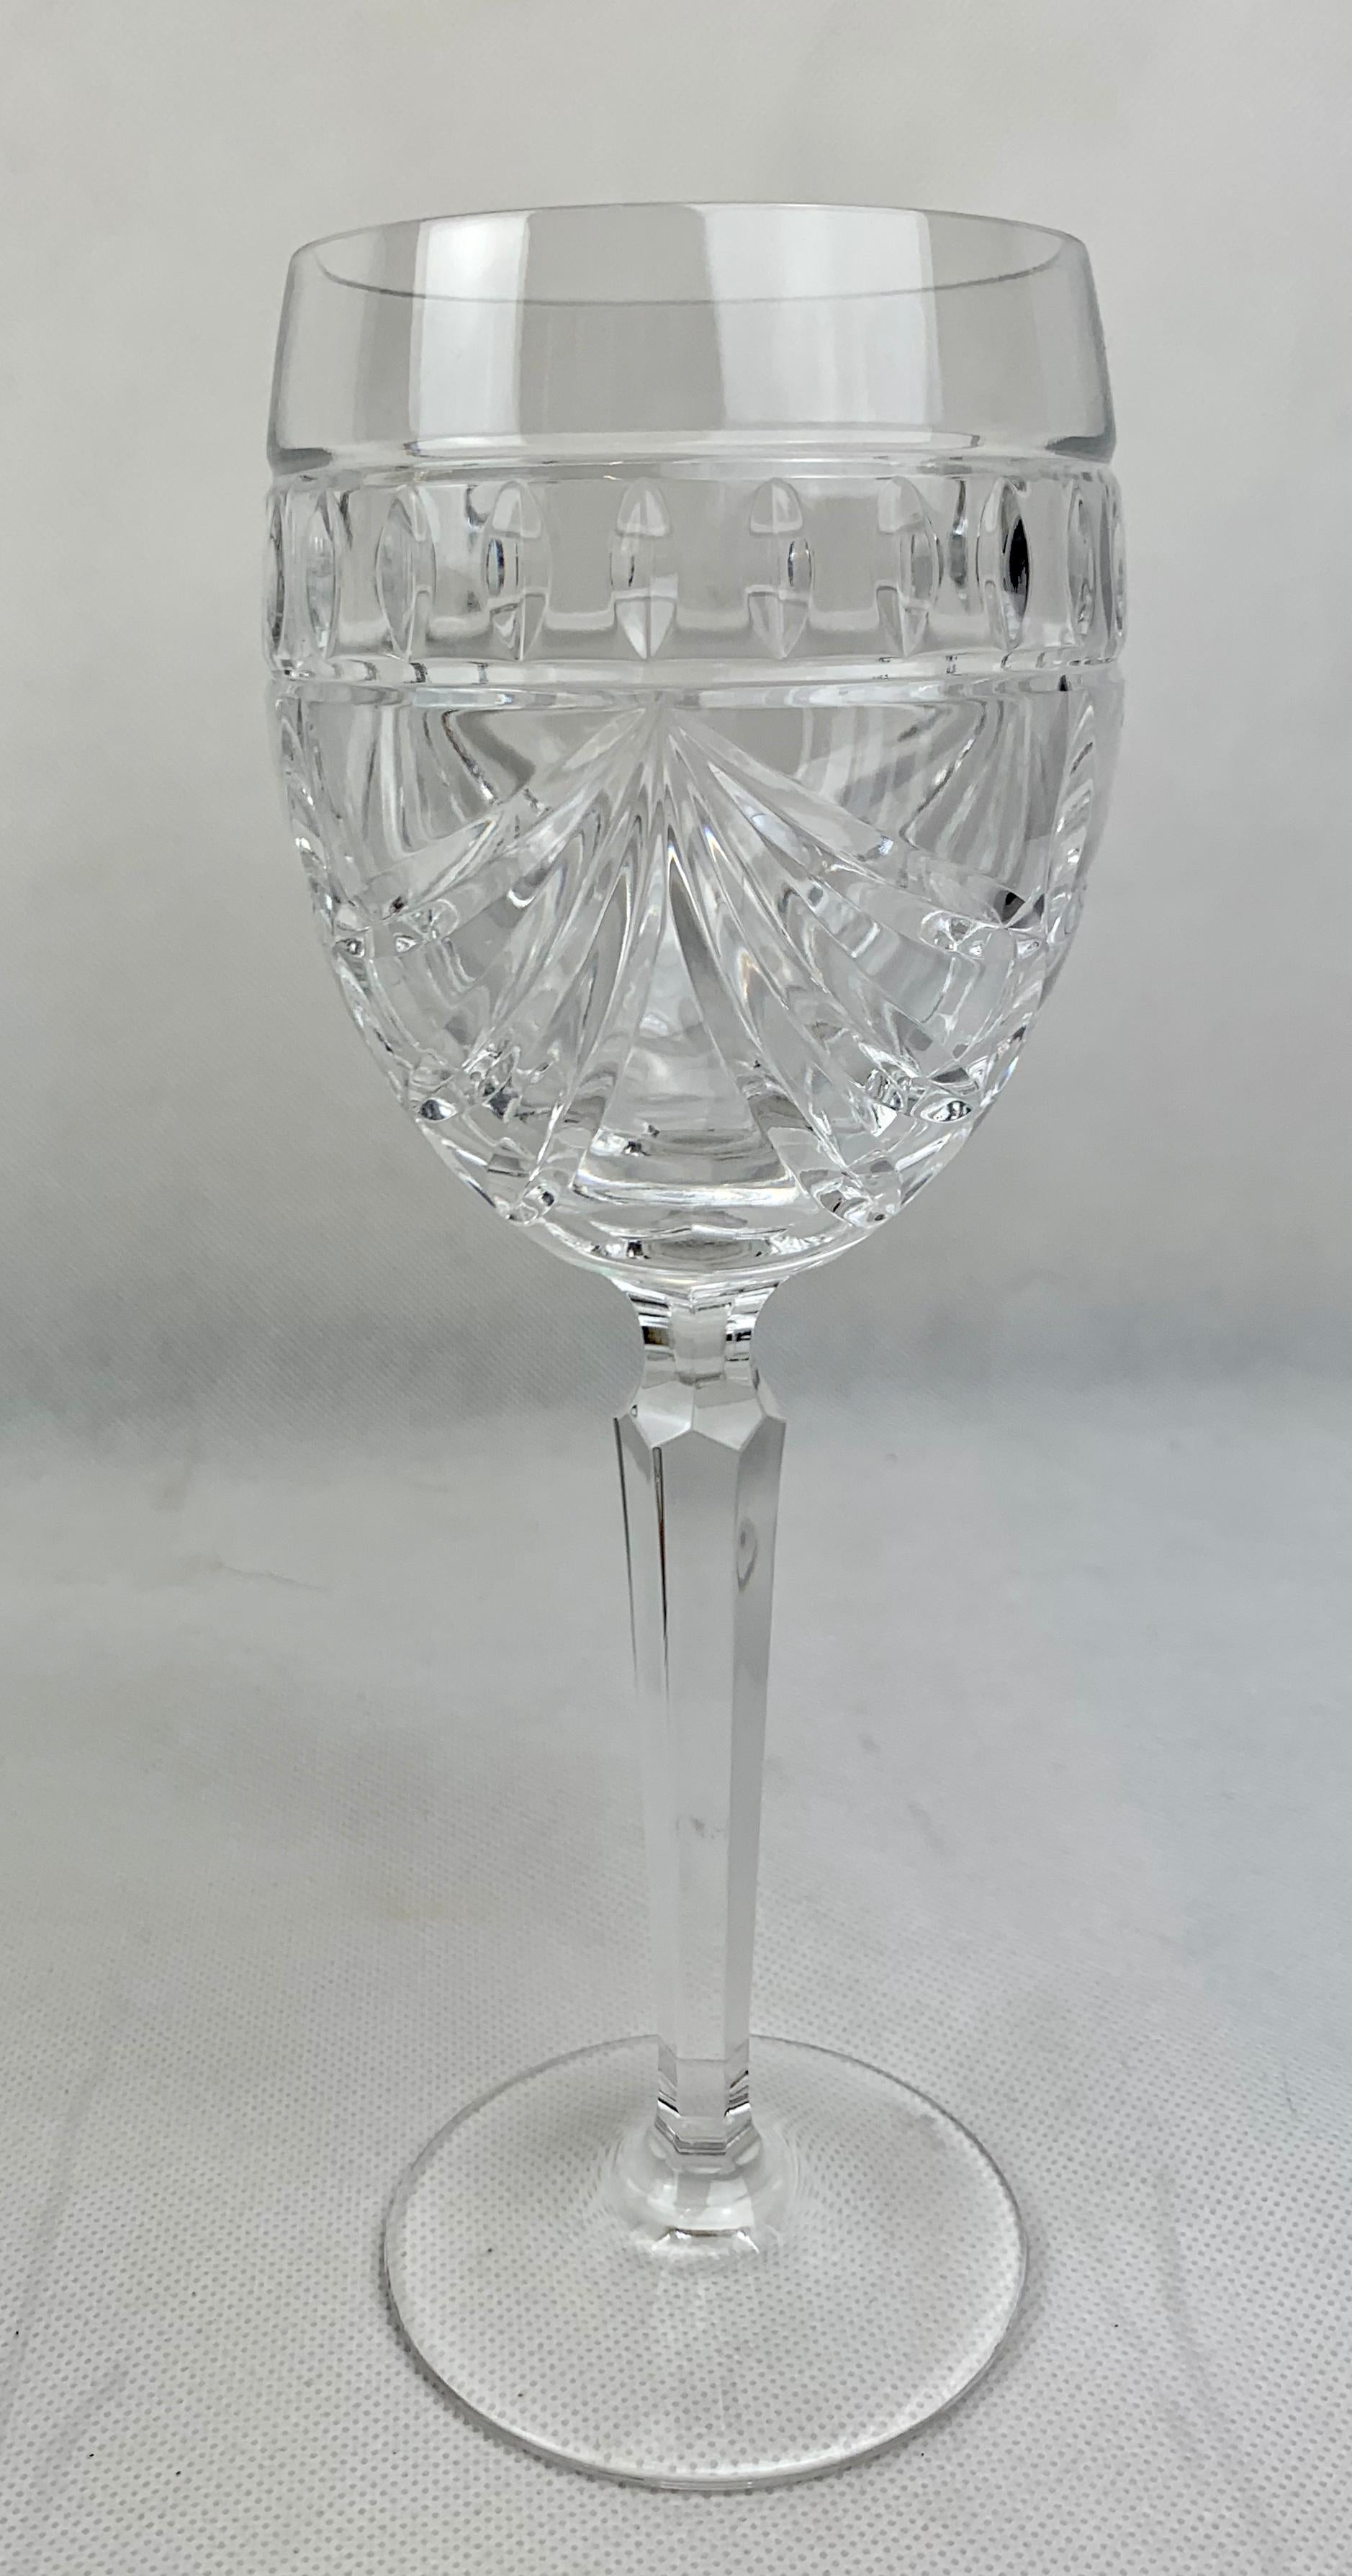 waterford crystal pattern identification